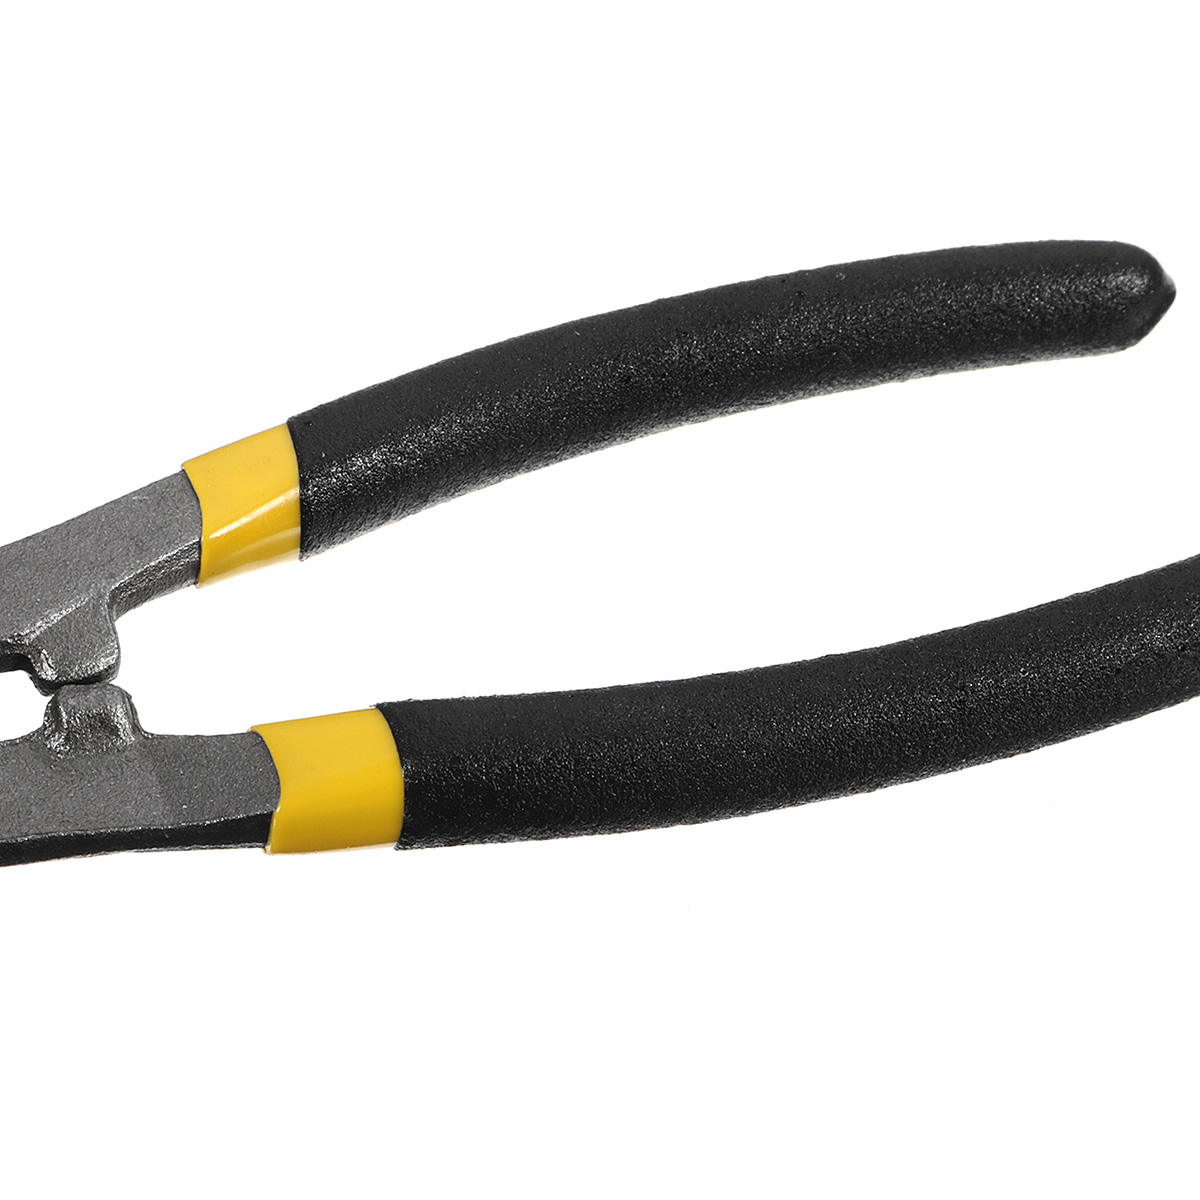 Heavy-Duty-Carbon-Steel-6inch8inch10inch-Cable-Wire-Cutter-Strippers-Cutters-Tool-1154501-3